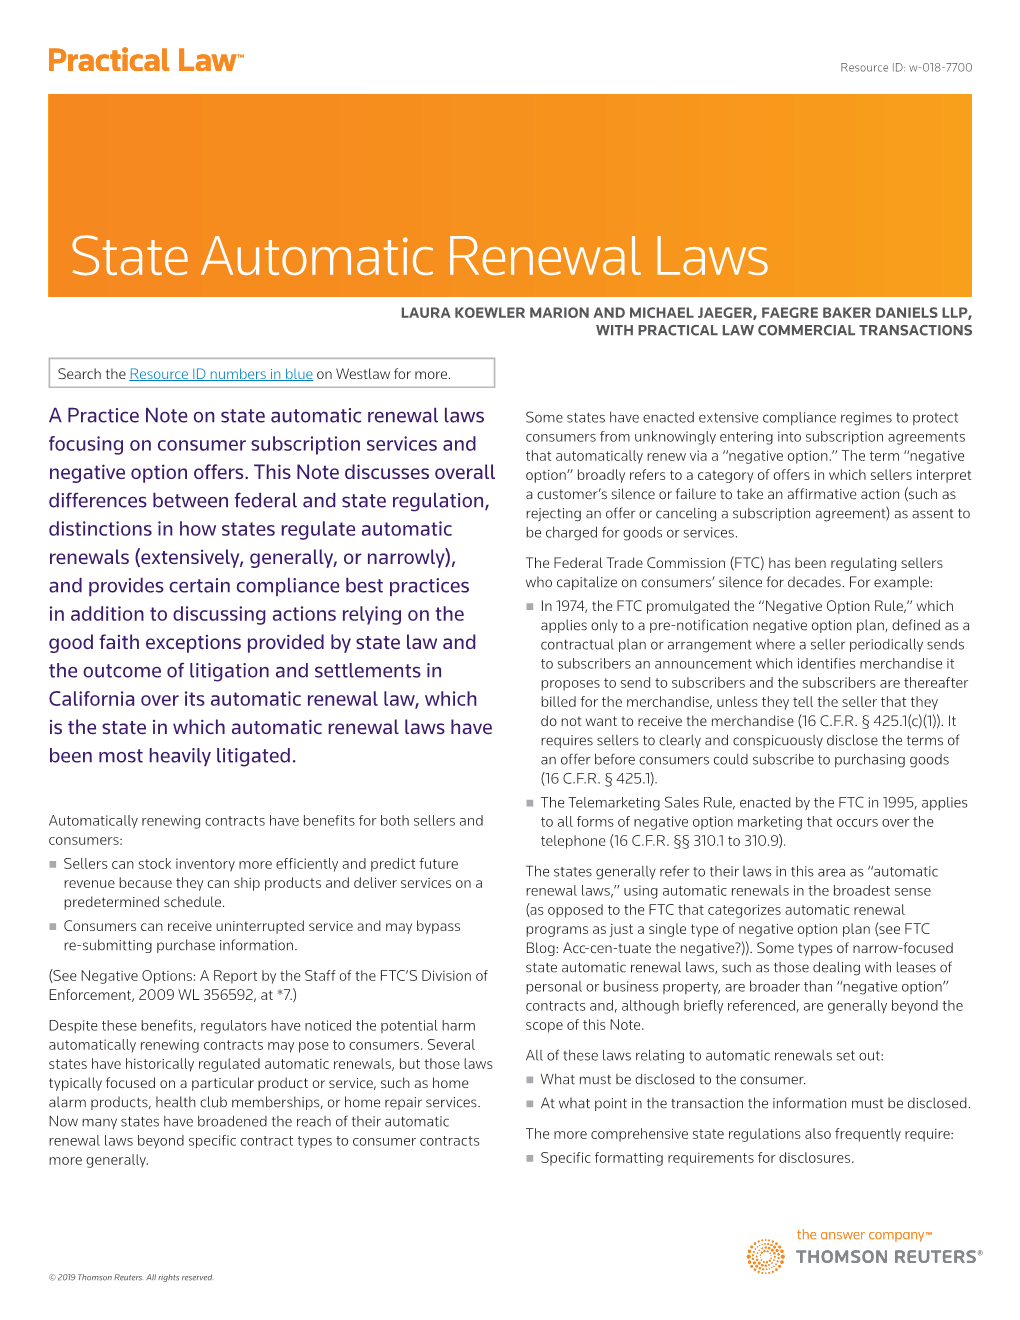 State Automatic Renewal Laws